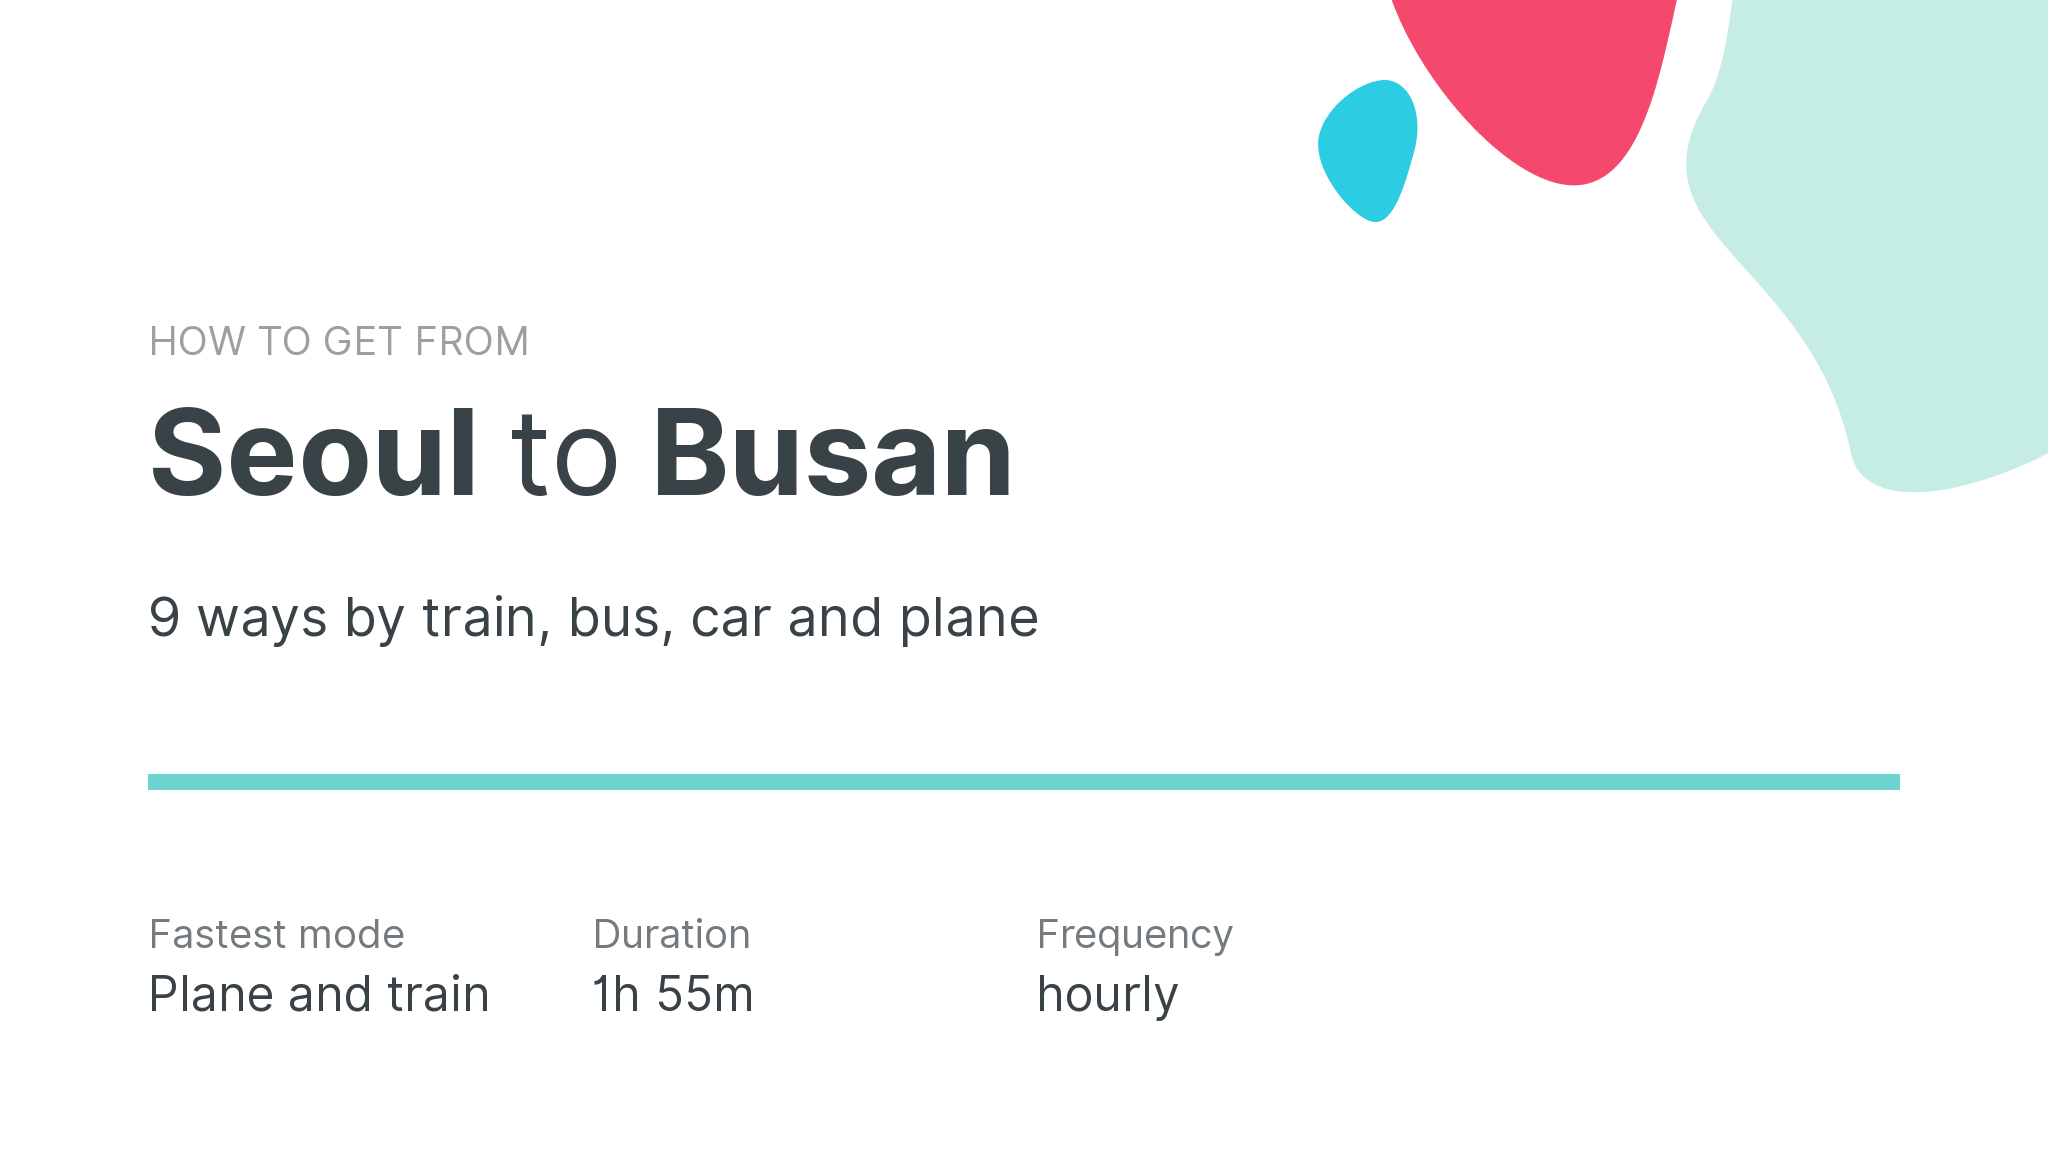 How do I get from Seoul to Busan